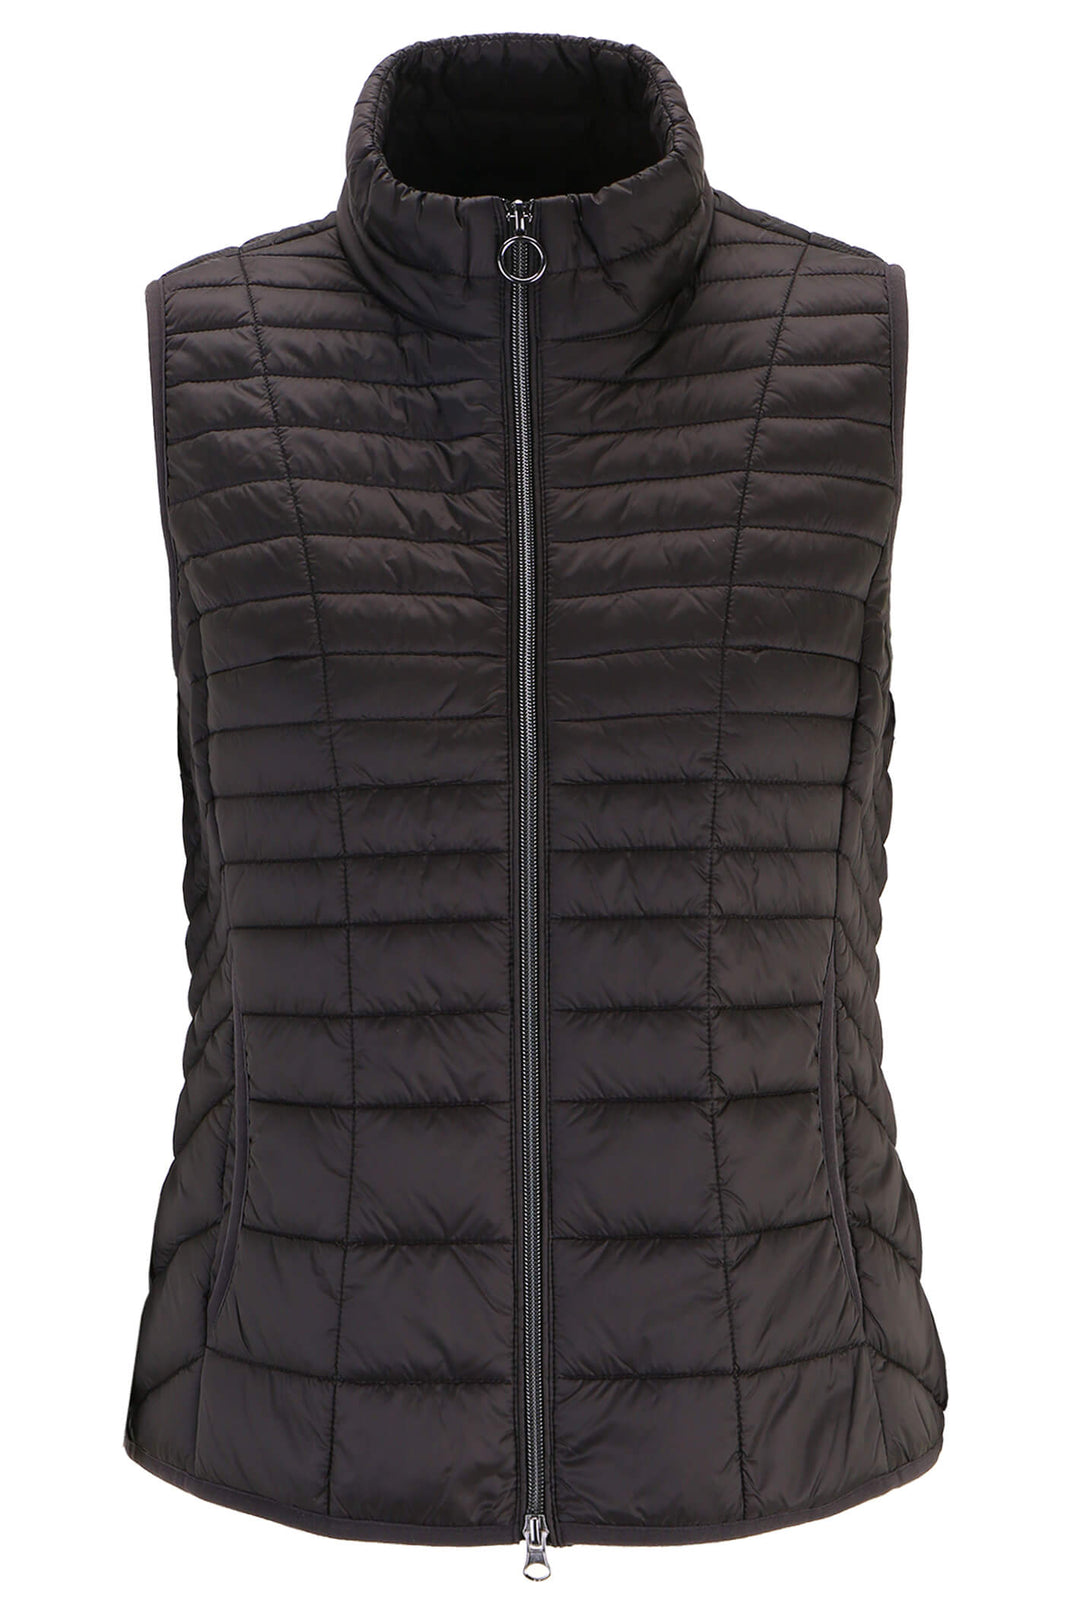 Betty Barclay 7195 1902 9045 Black Padded Gilet - Dotique Chestefield